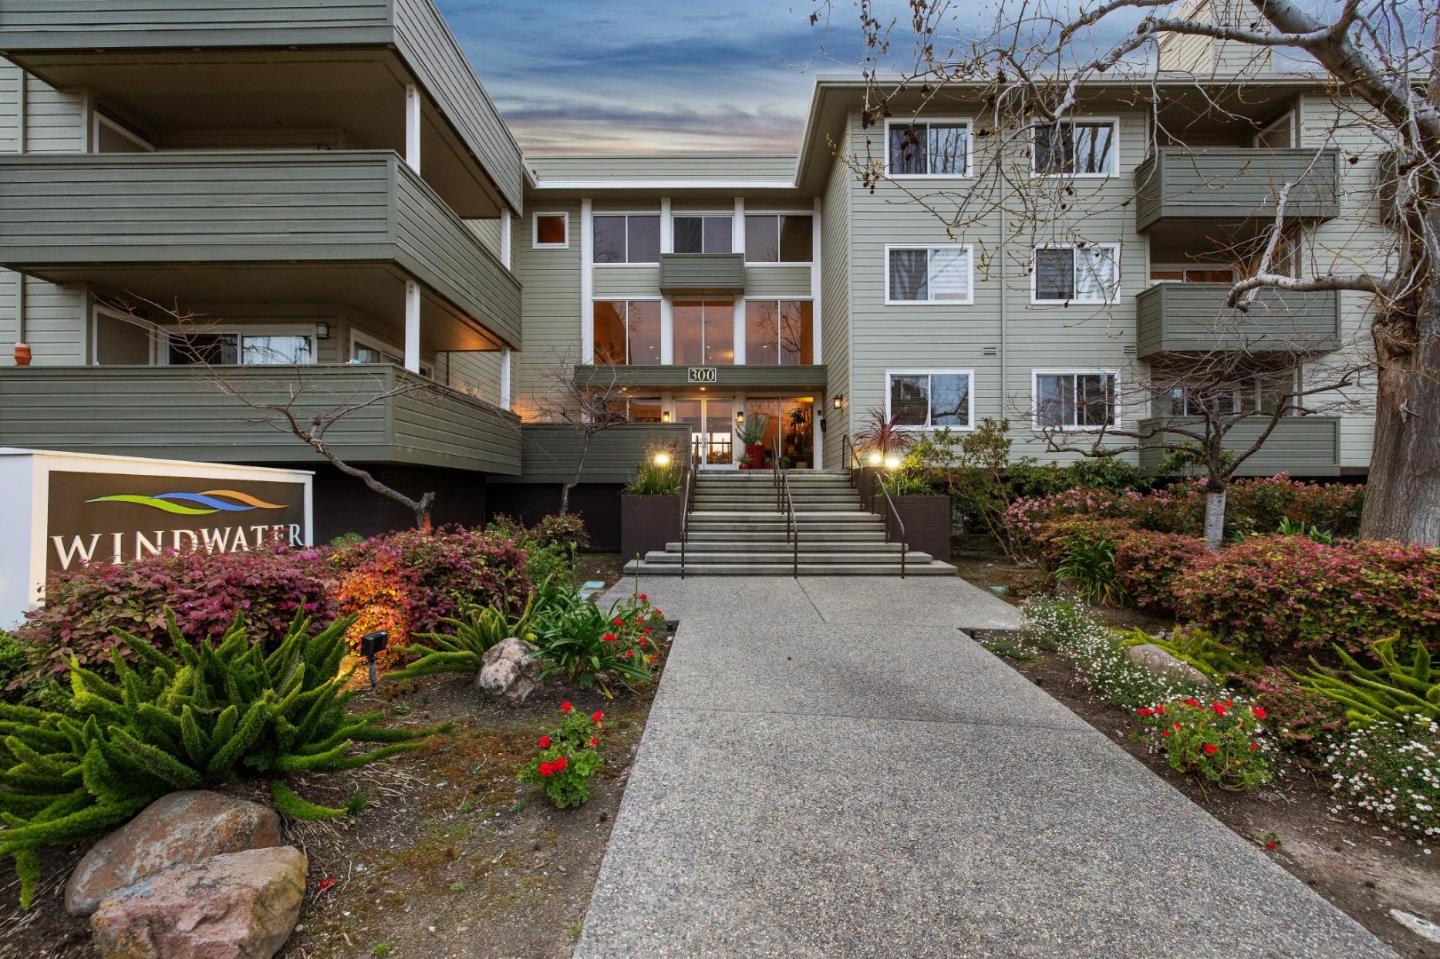 Photo of 300 Murchison Dr #119 in Millbrae, CA